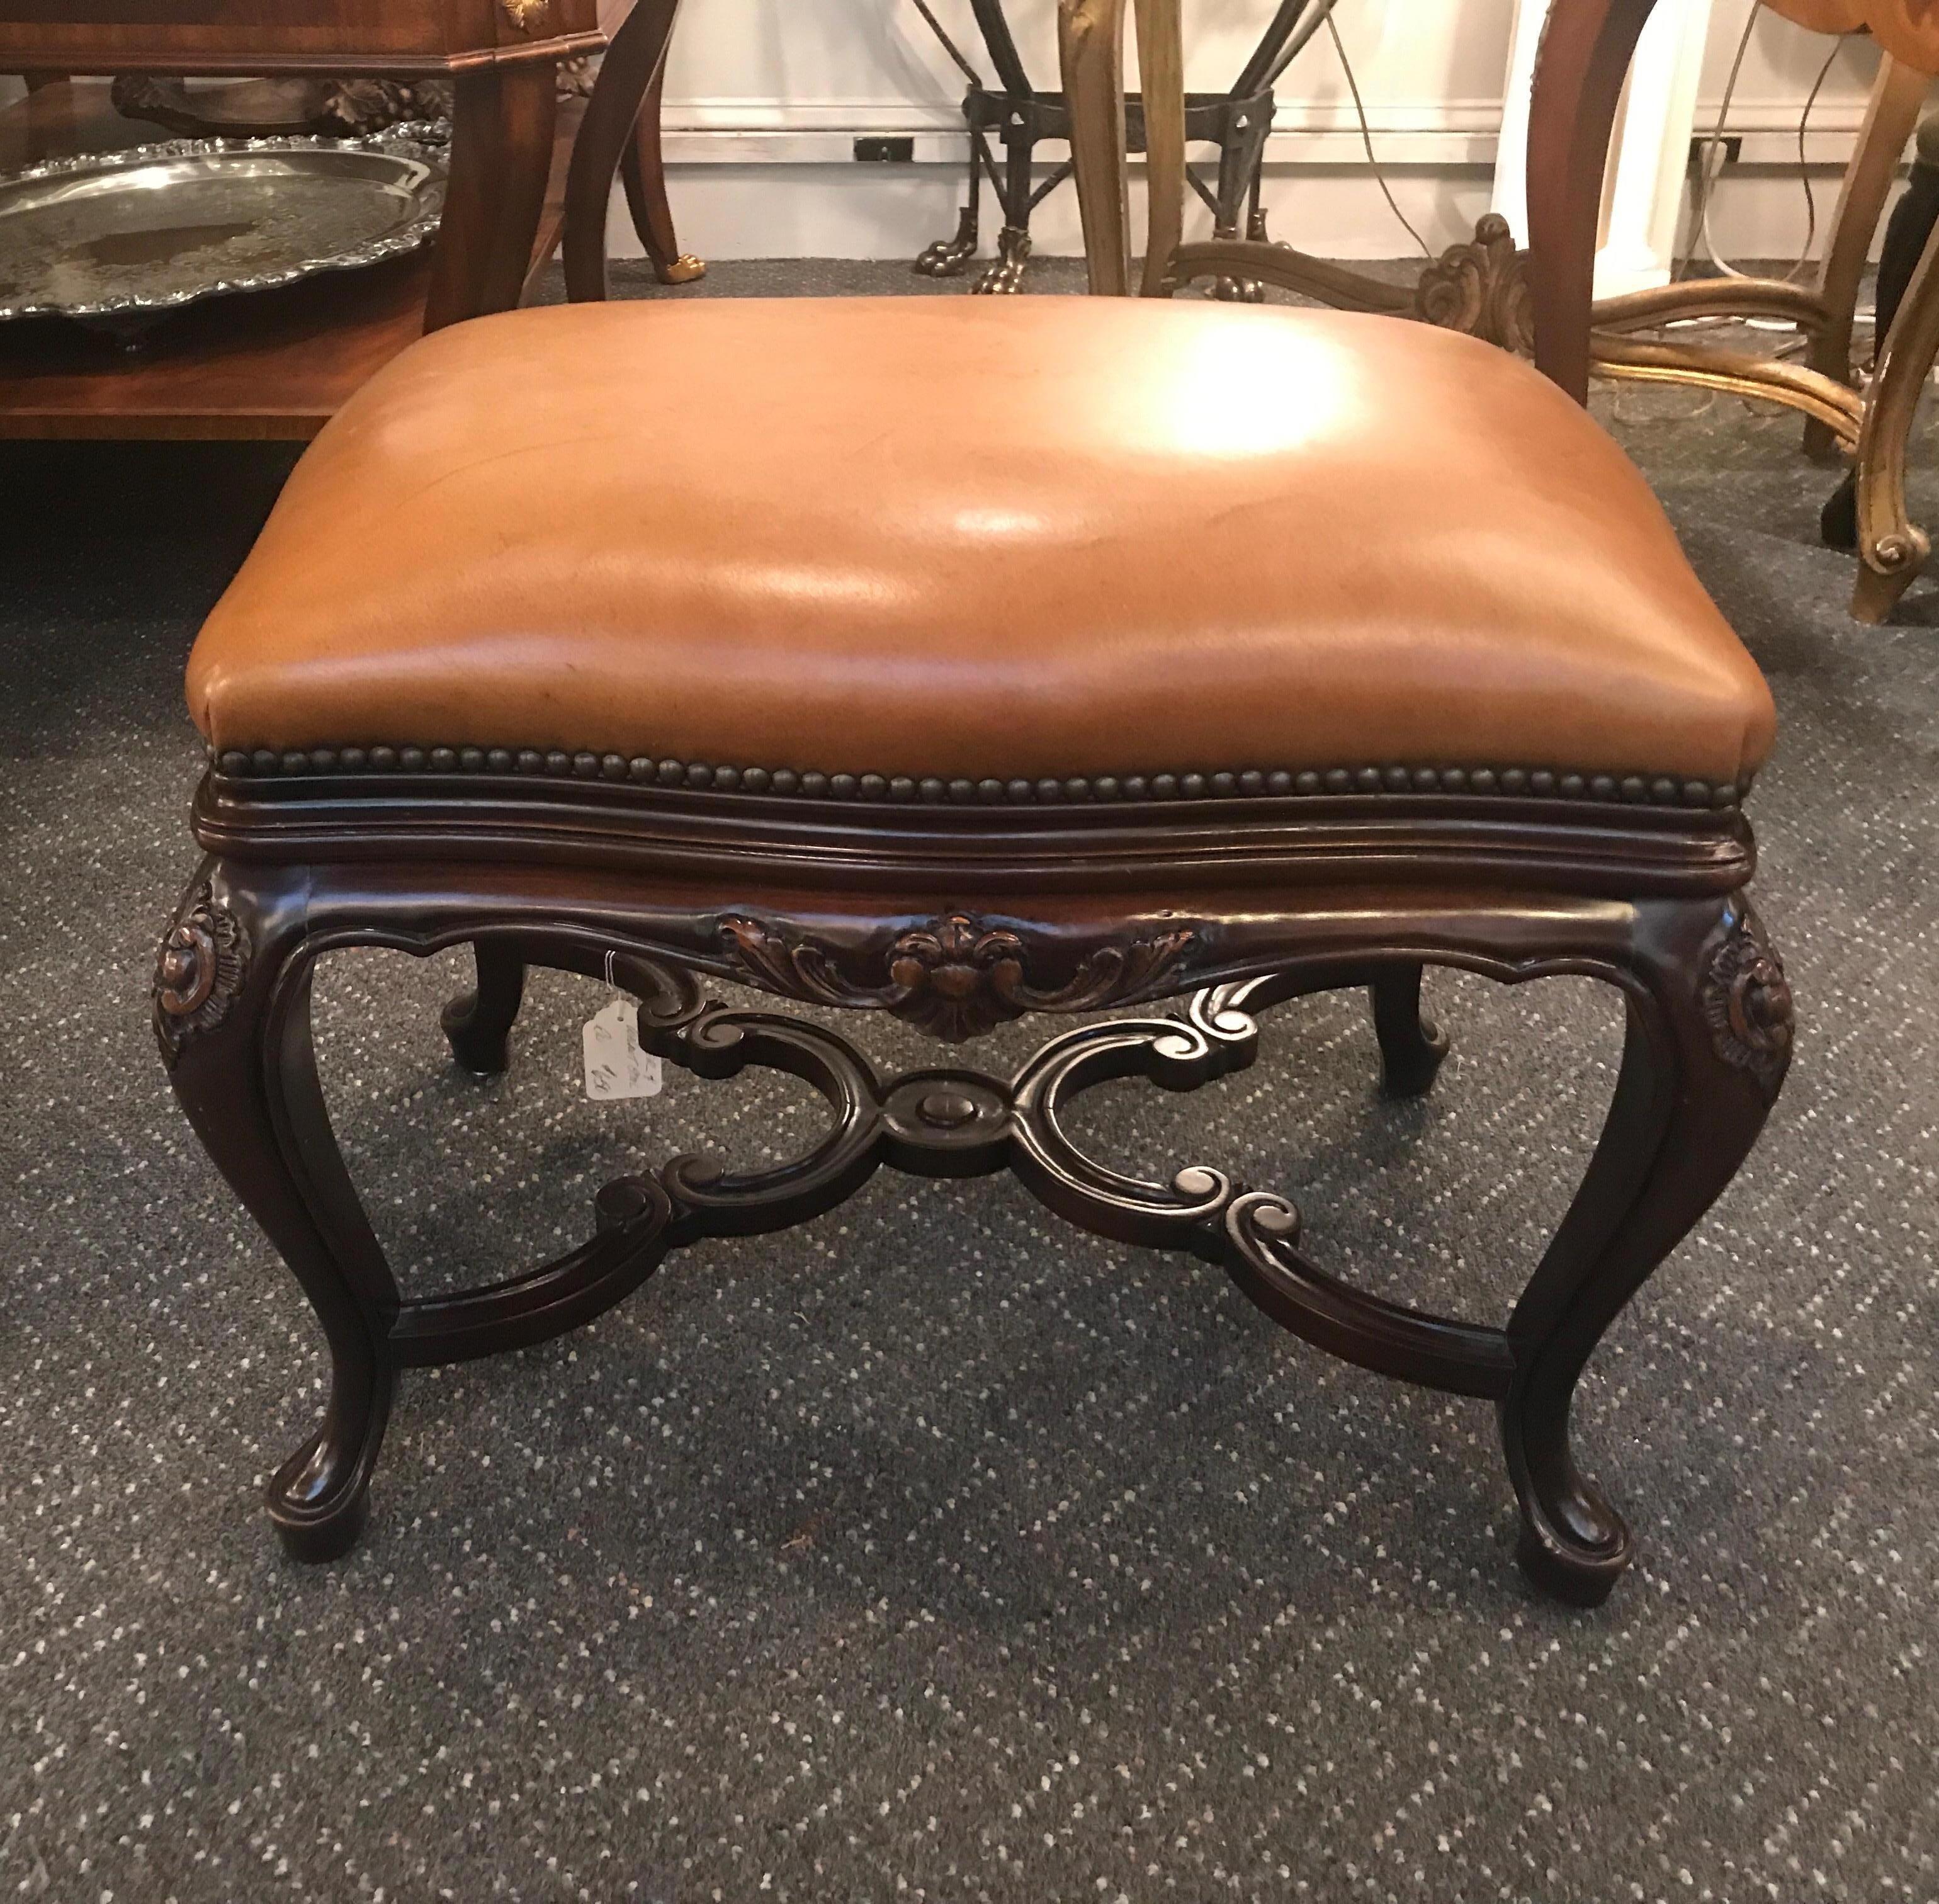 A deep brown walnut base with nicely carved details with camel color leather seat and aged nail head trim. The carved legs with cabriole shape with a nicely detailed stretcher base. There are some natural variations in the leather.
 